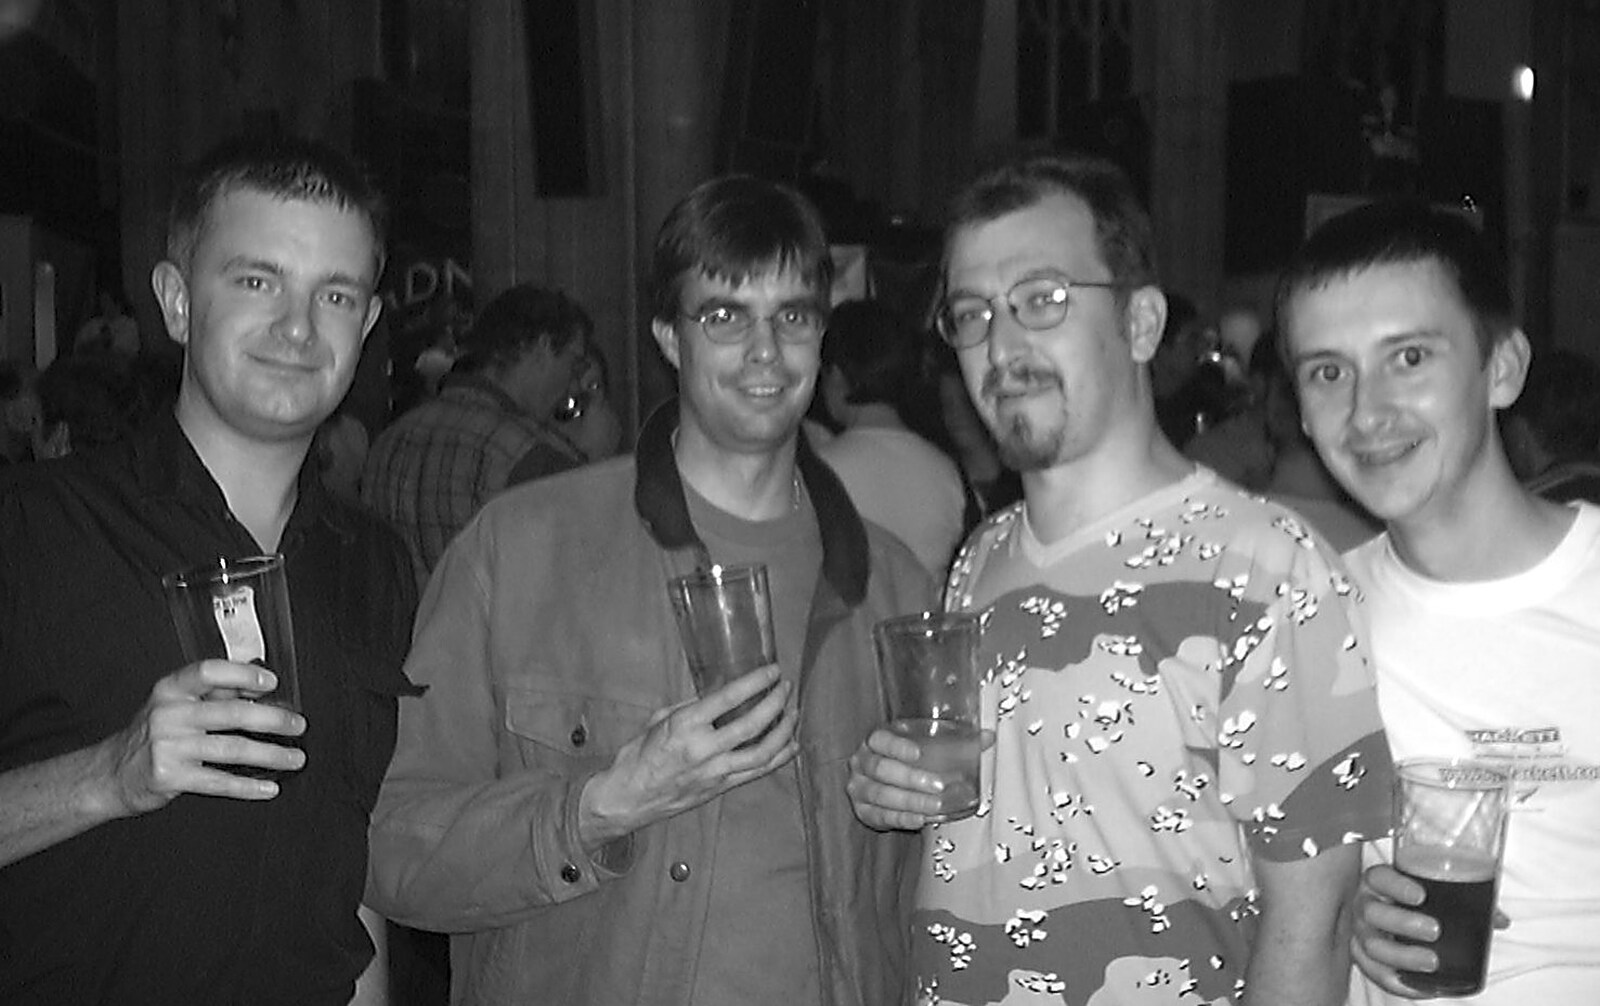 Nosher, Dan 'Parrot', Phil and Andrew from The Norwich Beer Festival, St. Andrew's Hall, Norwich - 24th October 2001